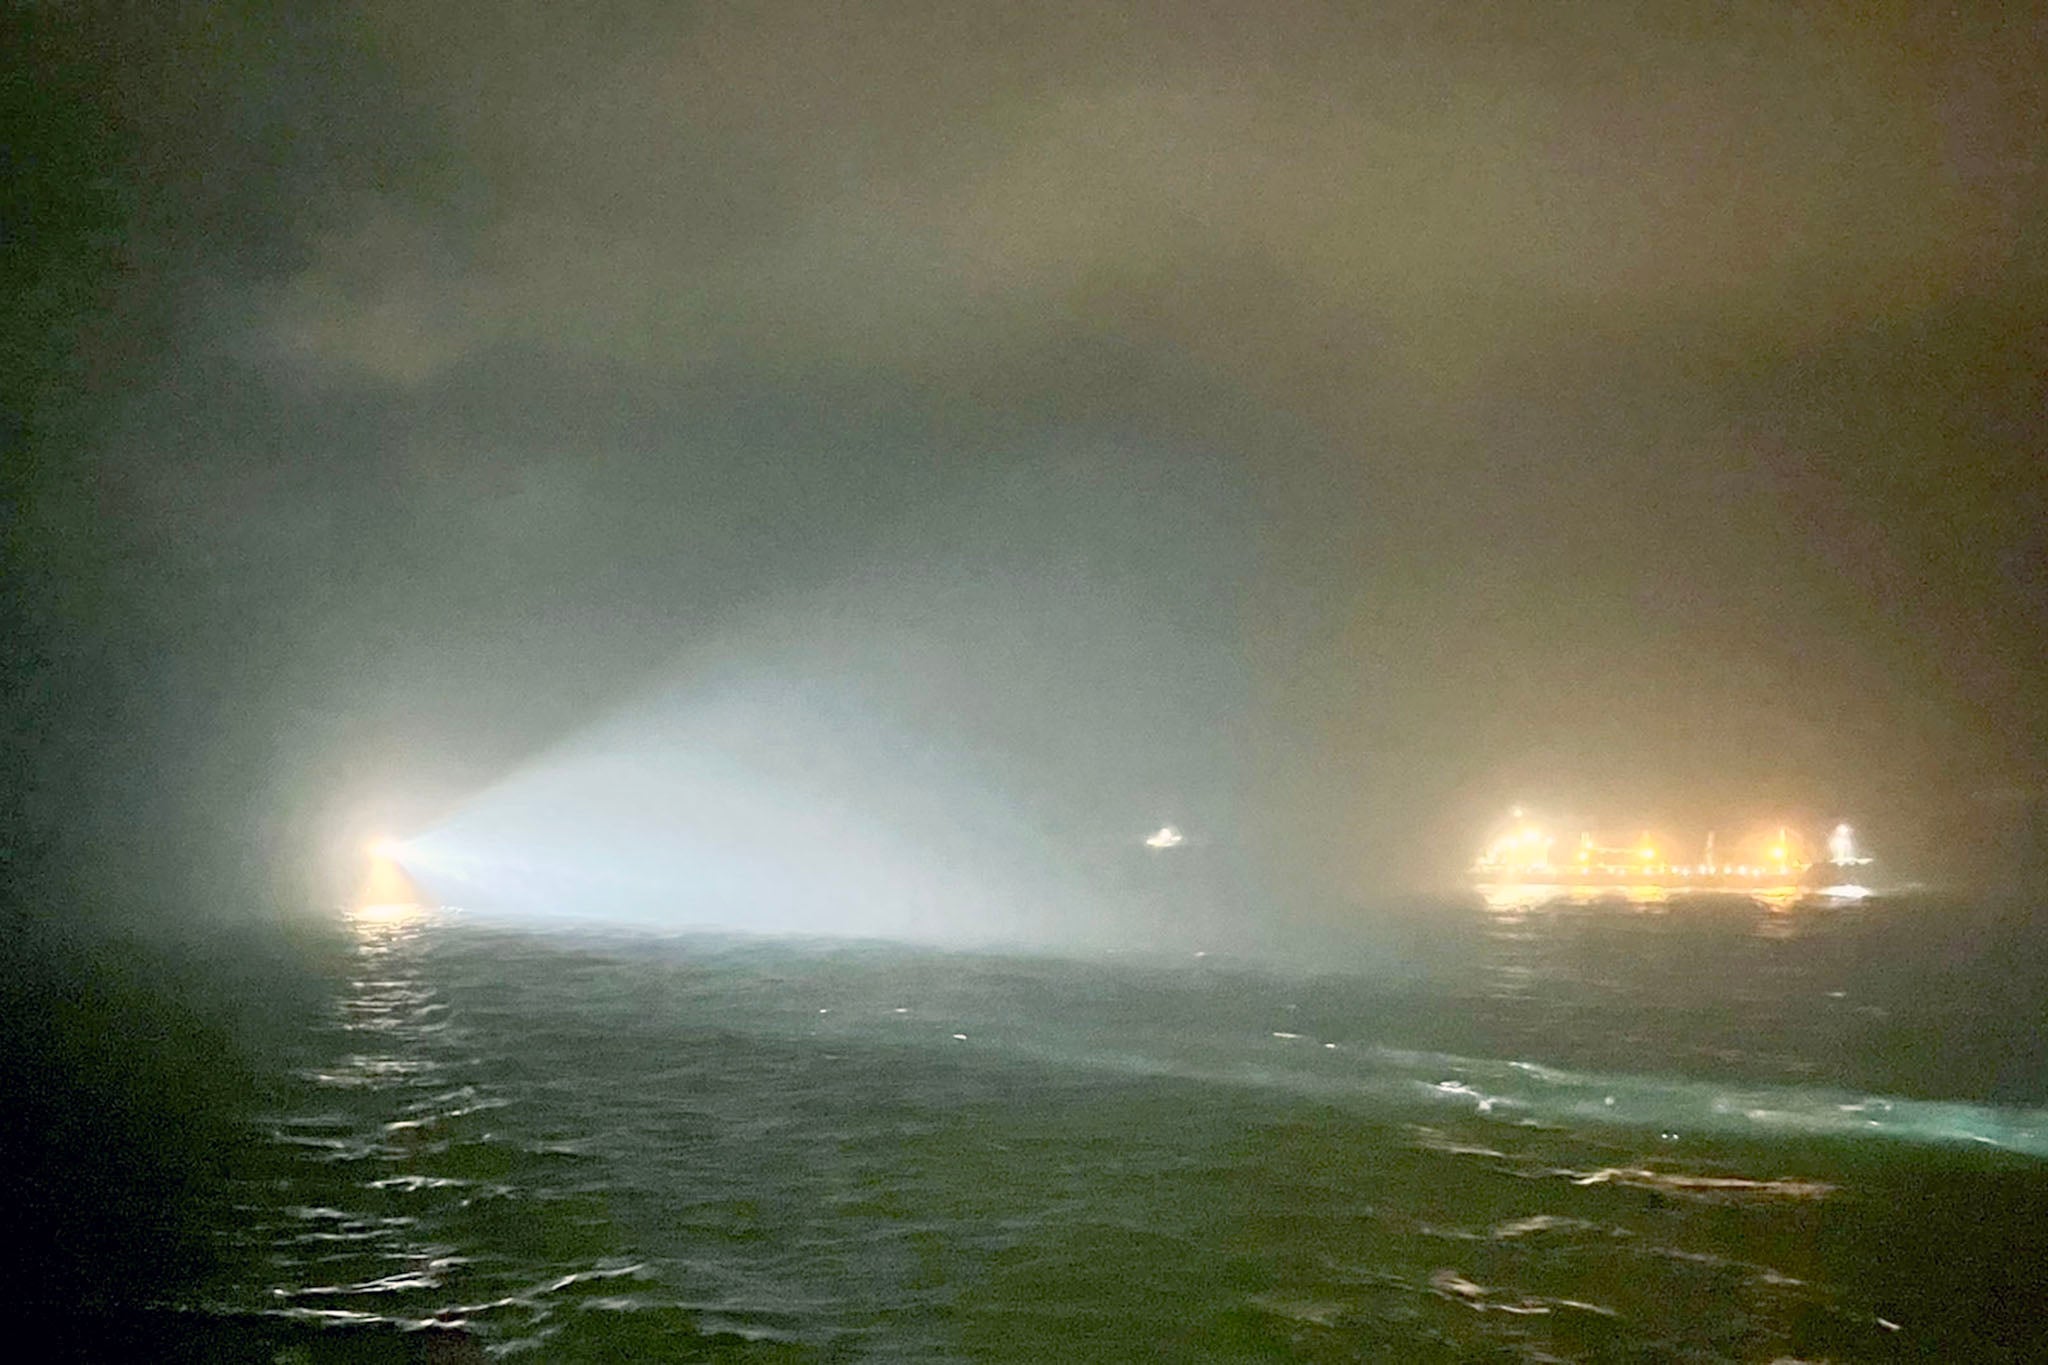 Handout photo showing search lights scanning the water near to where the British cargo ship Verity sank following a collision with the Bahamas-flagged vessel Polesie in the North Sea